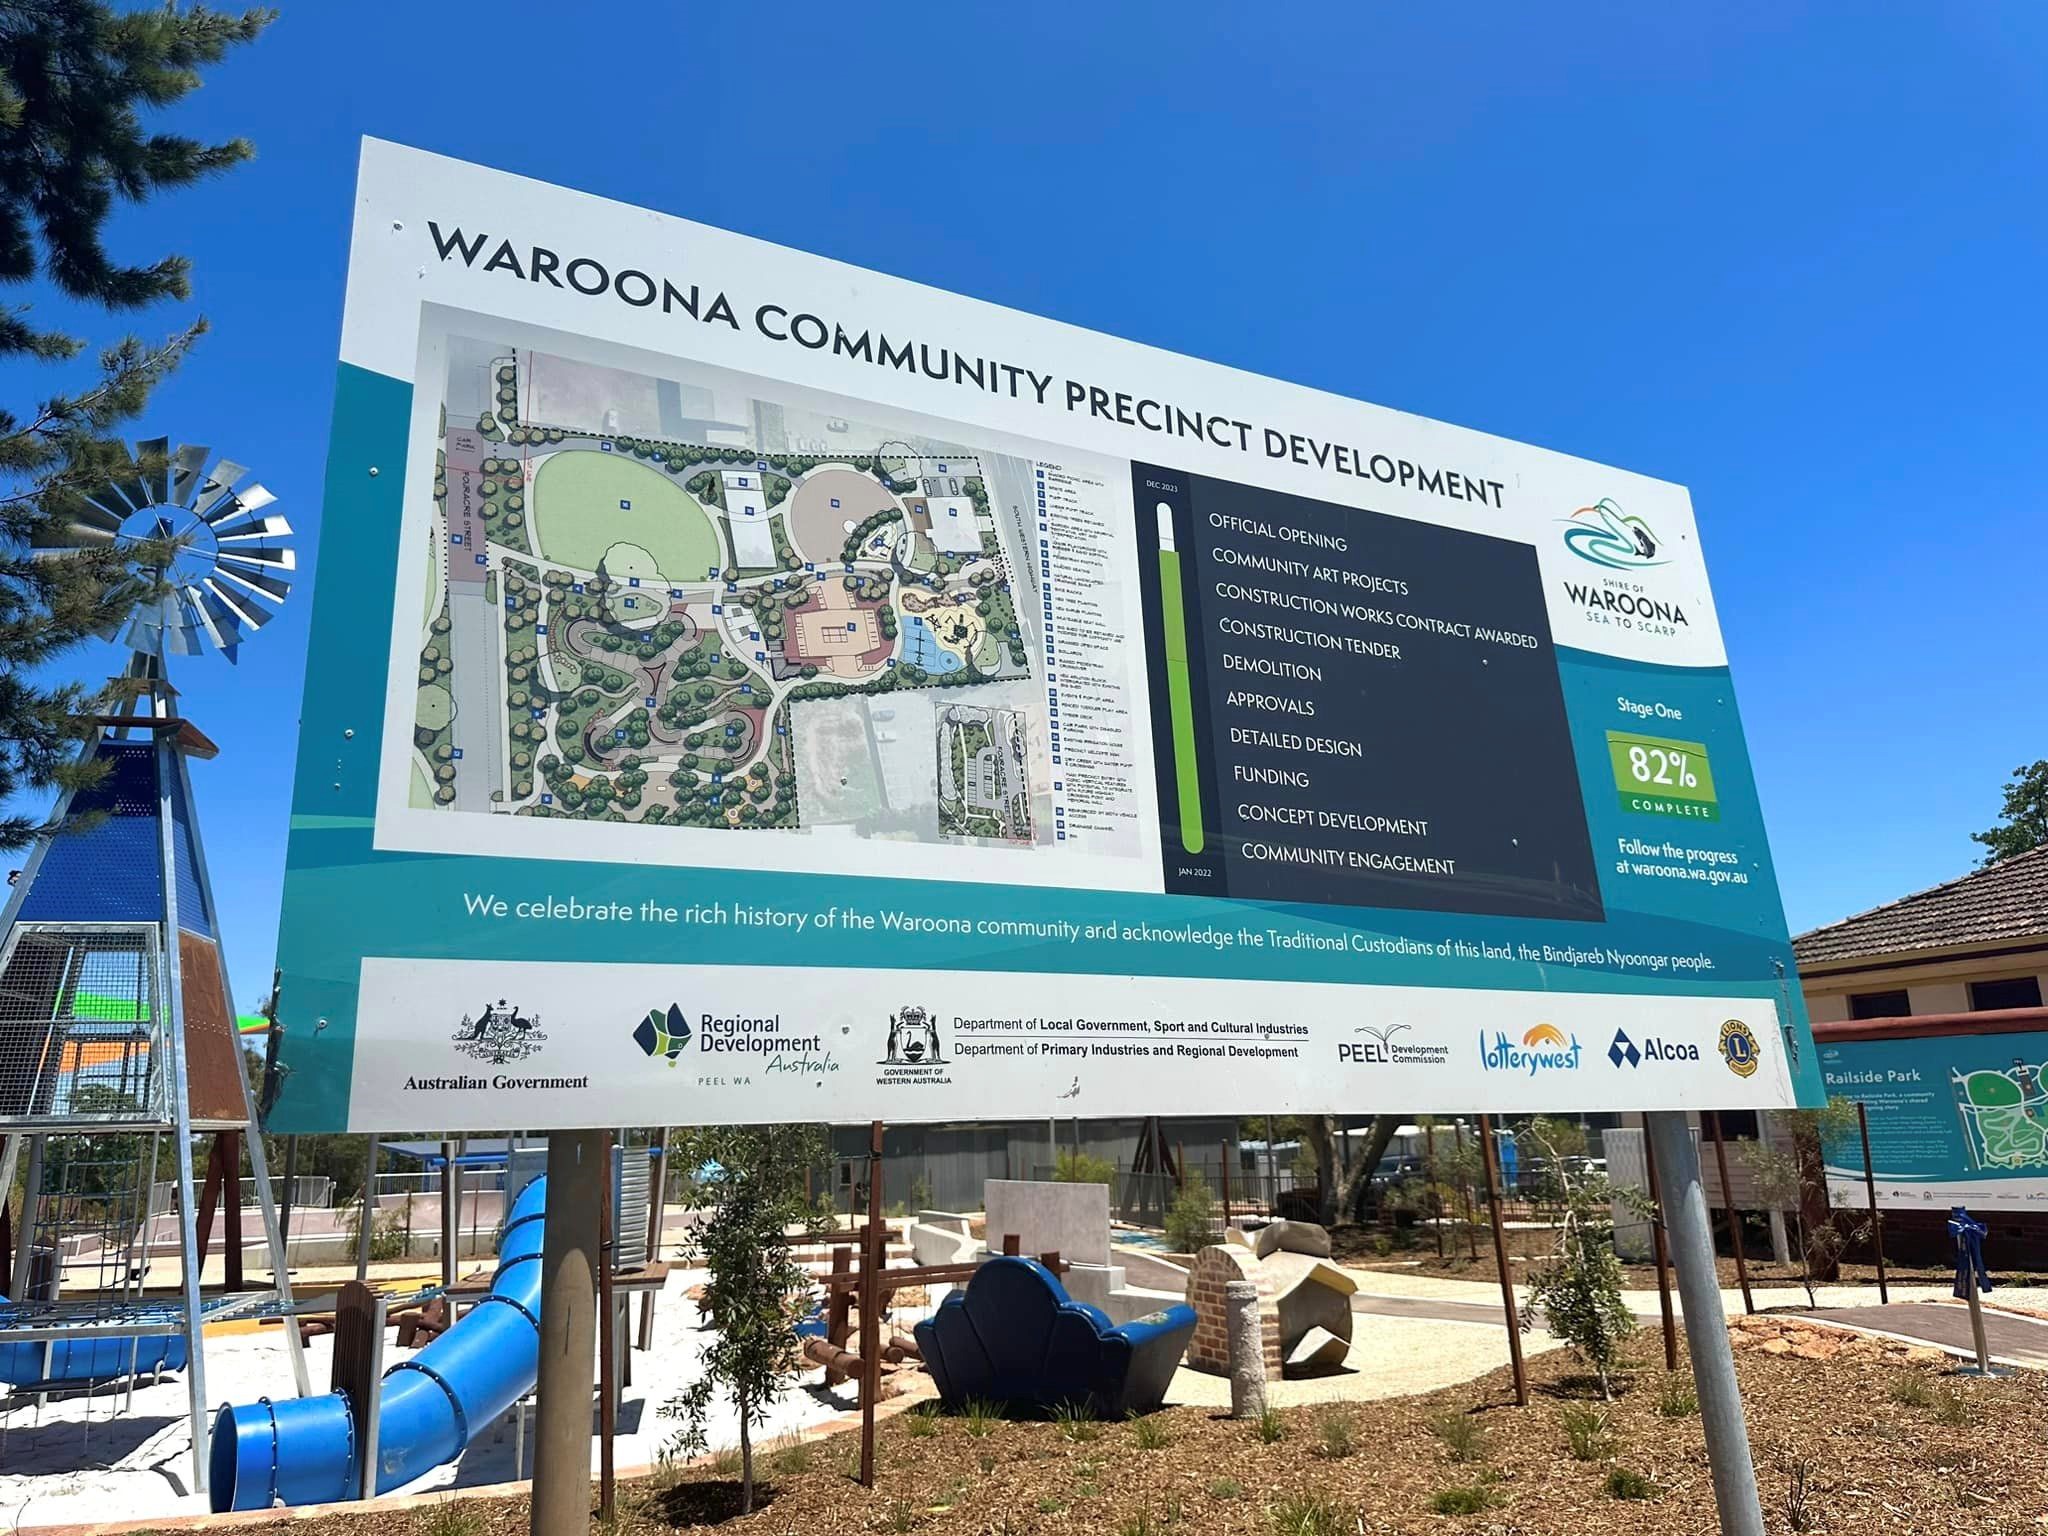 Waroona Railside Park and the signage showing the development  plans